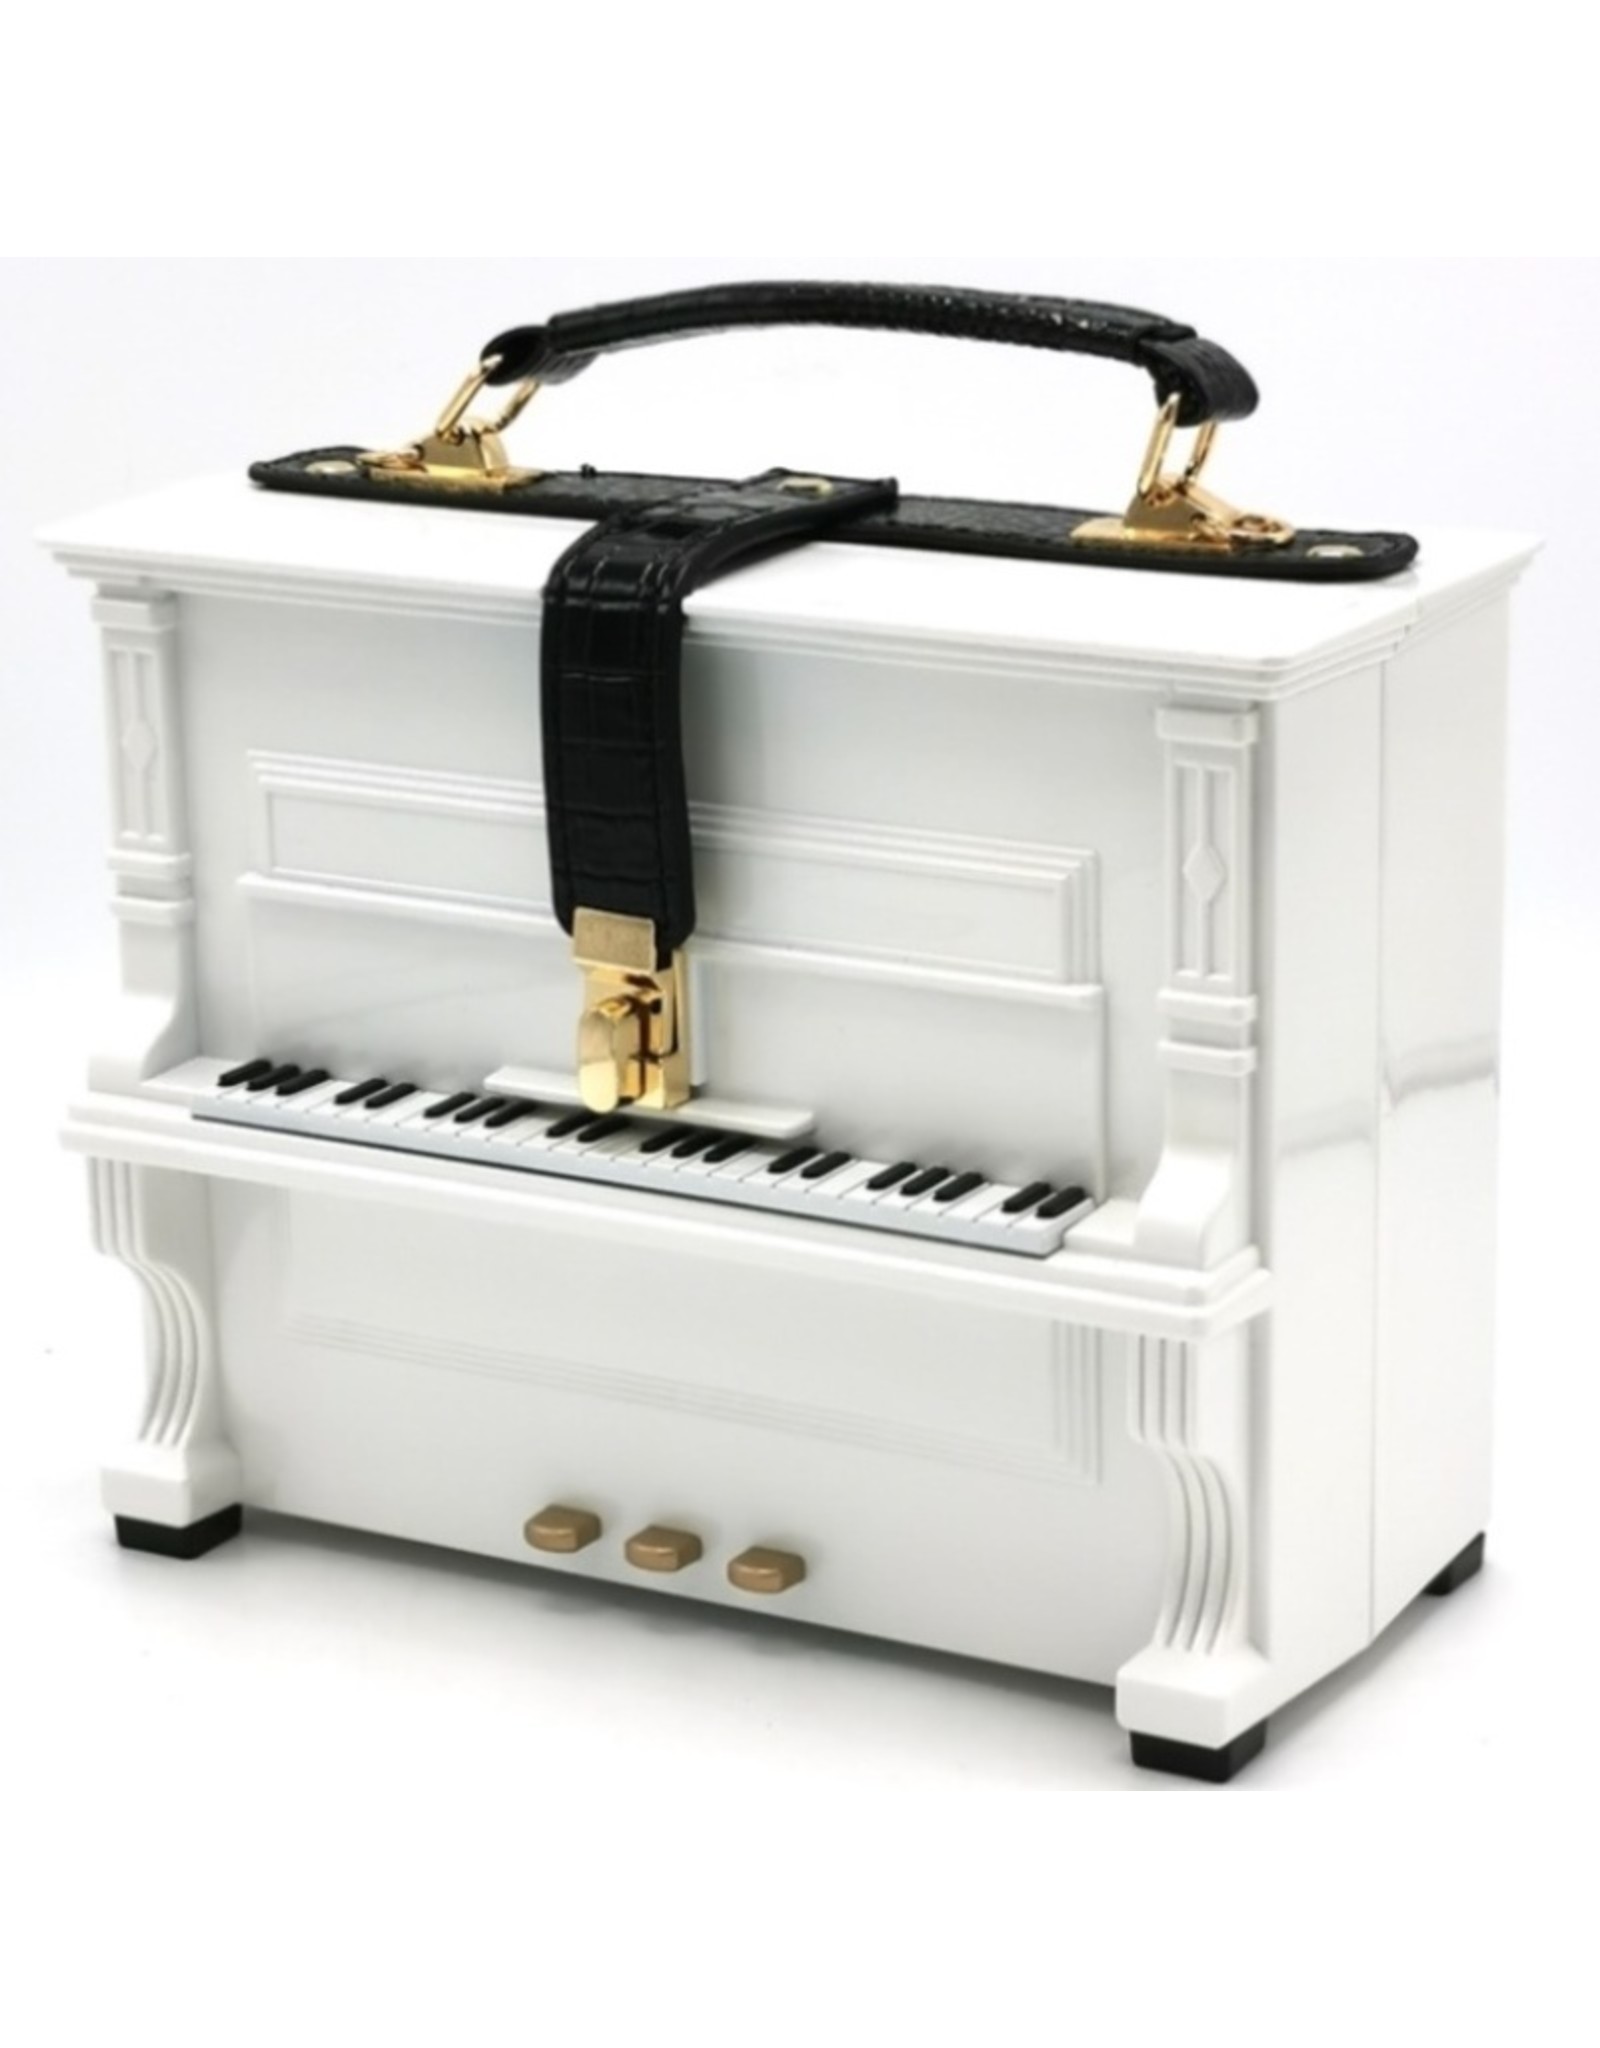 Magic Bags Fantasy bags and wallets - Piano Handbag in the shape of Real Pianored white